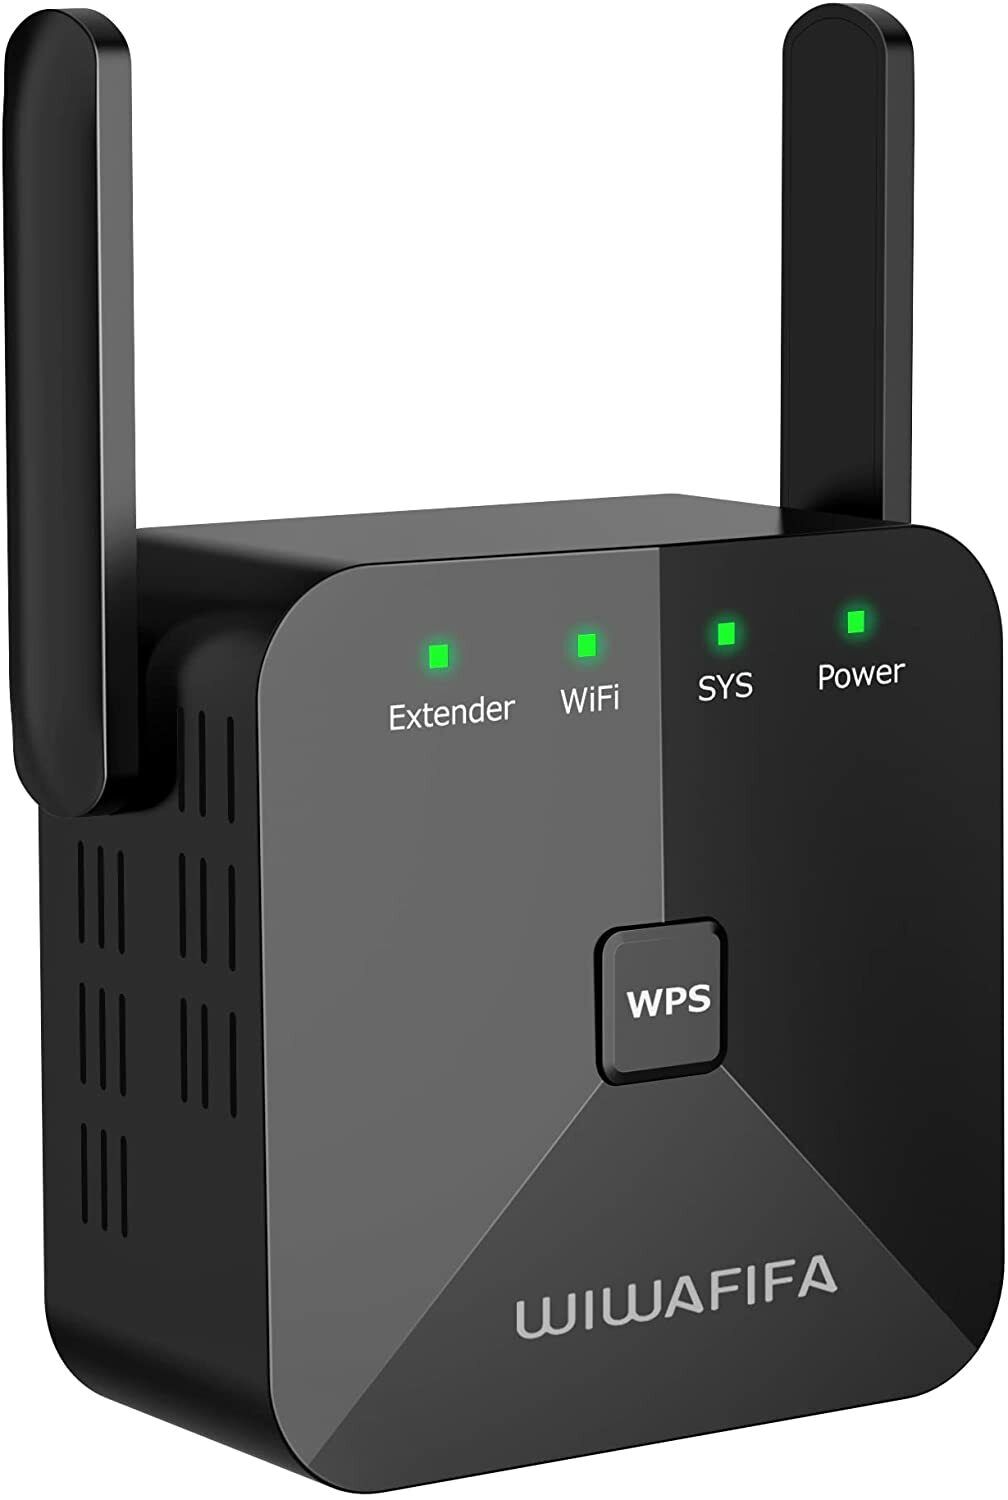 ONLY TODAY WiFi Extender/Repeater 300Mb/s LongRange SignalBoost 2.4GHz 2700sqft